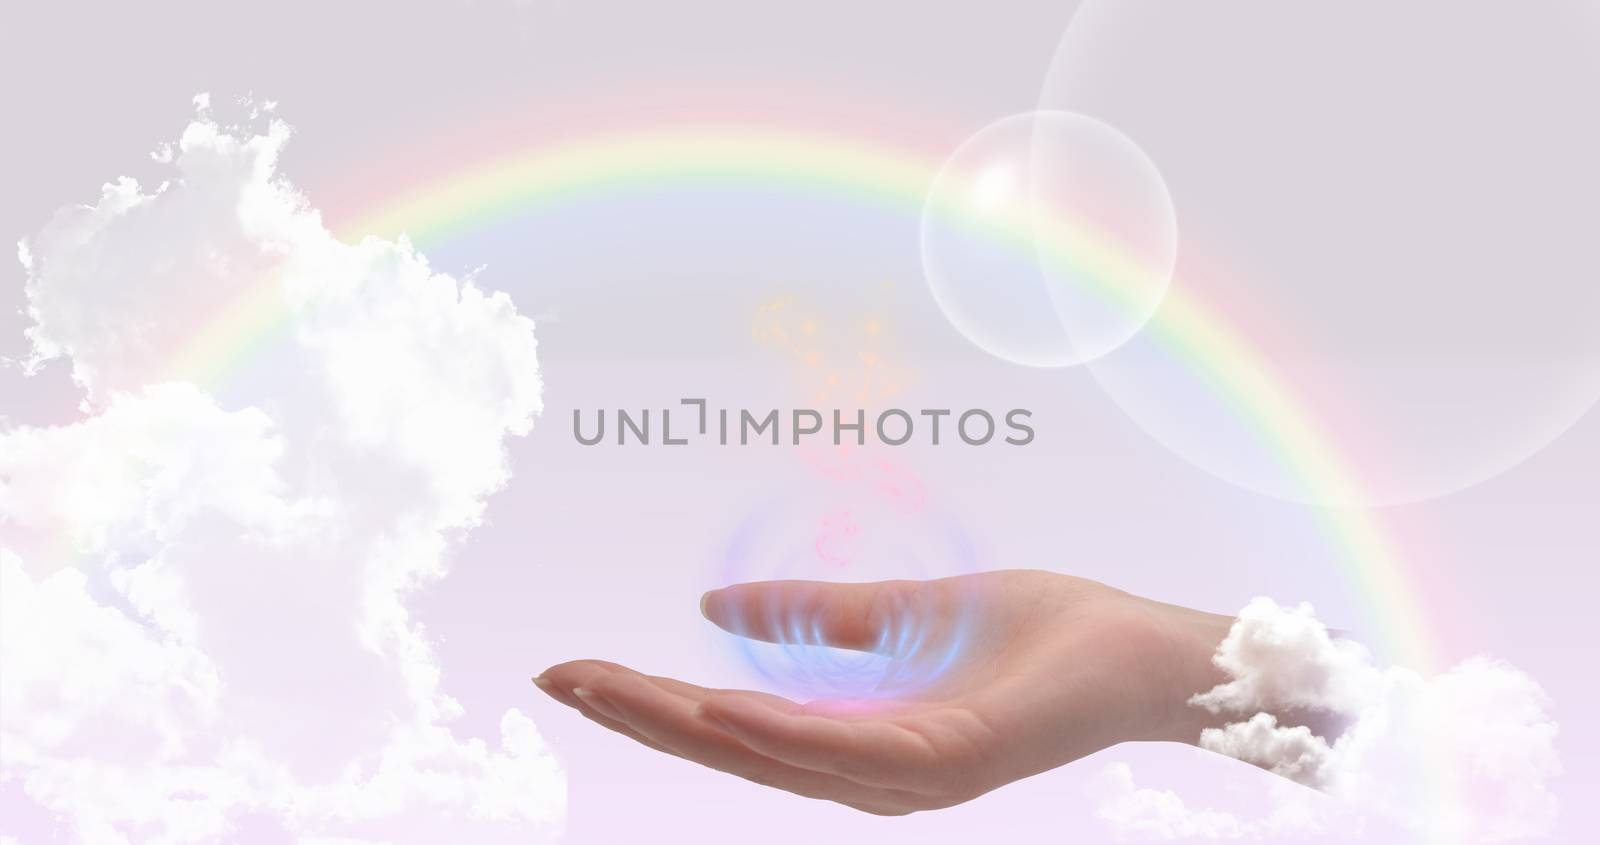 Healing hand on a sky background with rainbow